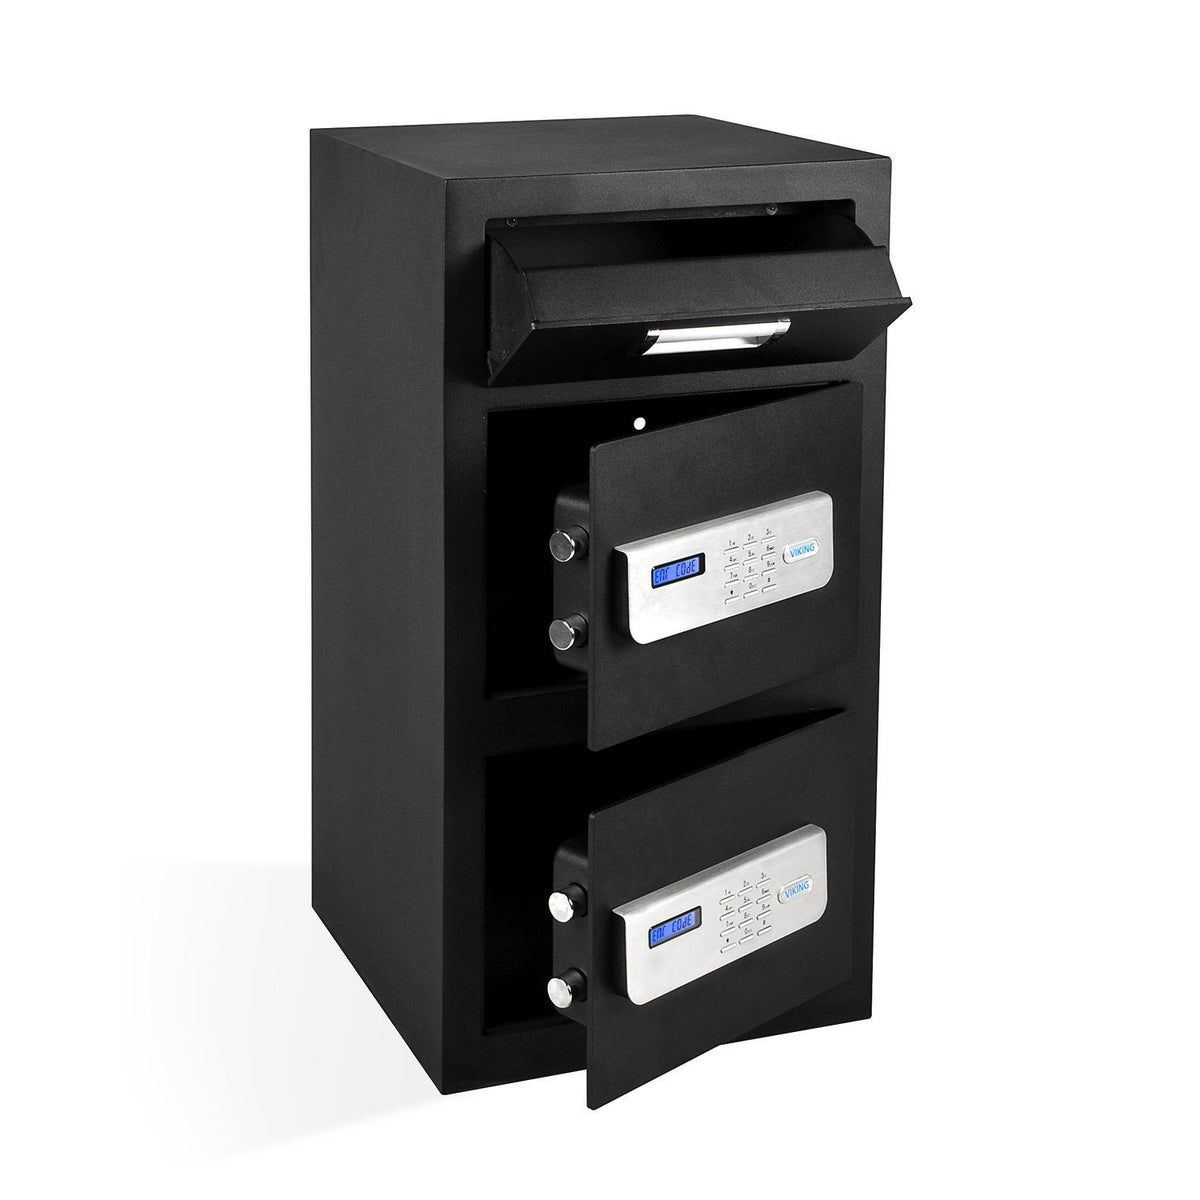 Viking VS-70DS Double Door Depository Safe with Electronic Locks Doors and Drop Slot Open